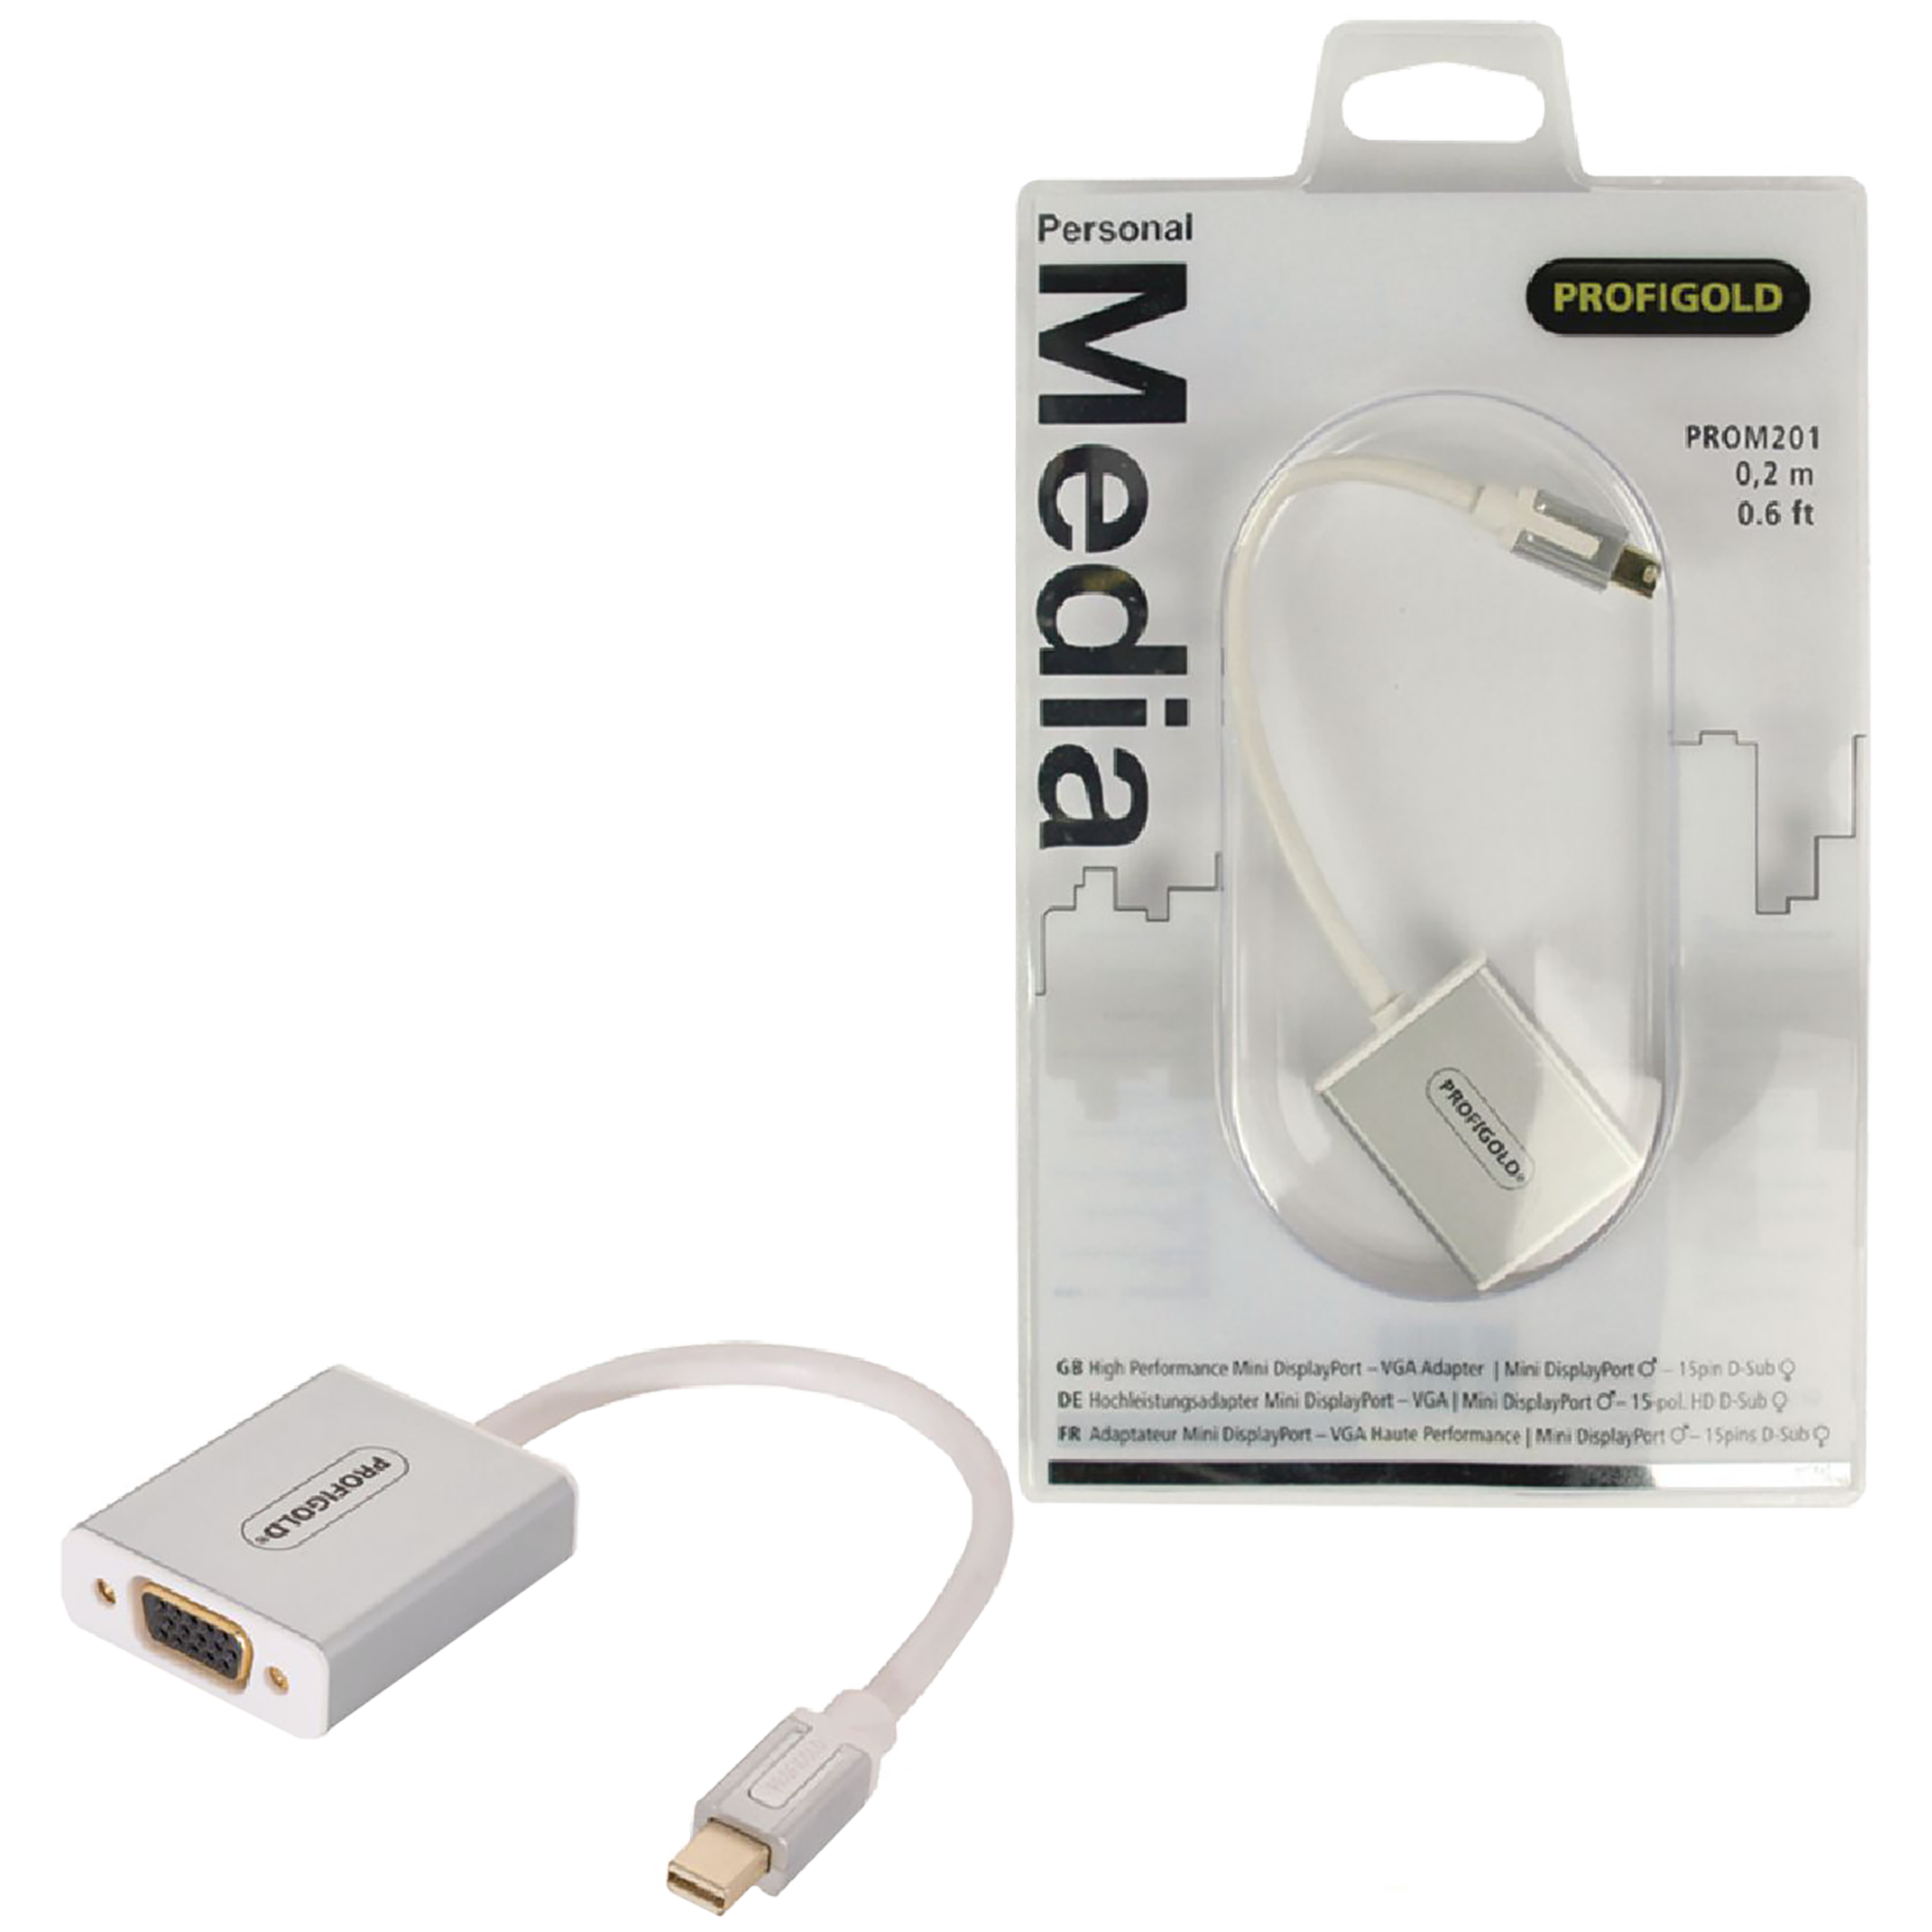 Profigold PROM201 PVC 0.2 Meter Mini DisplayPort to VGA Video Display Cable (Double Shielded Cable, White)